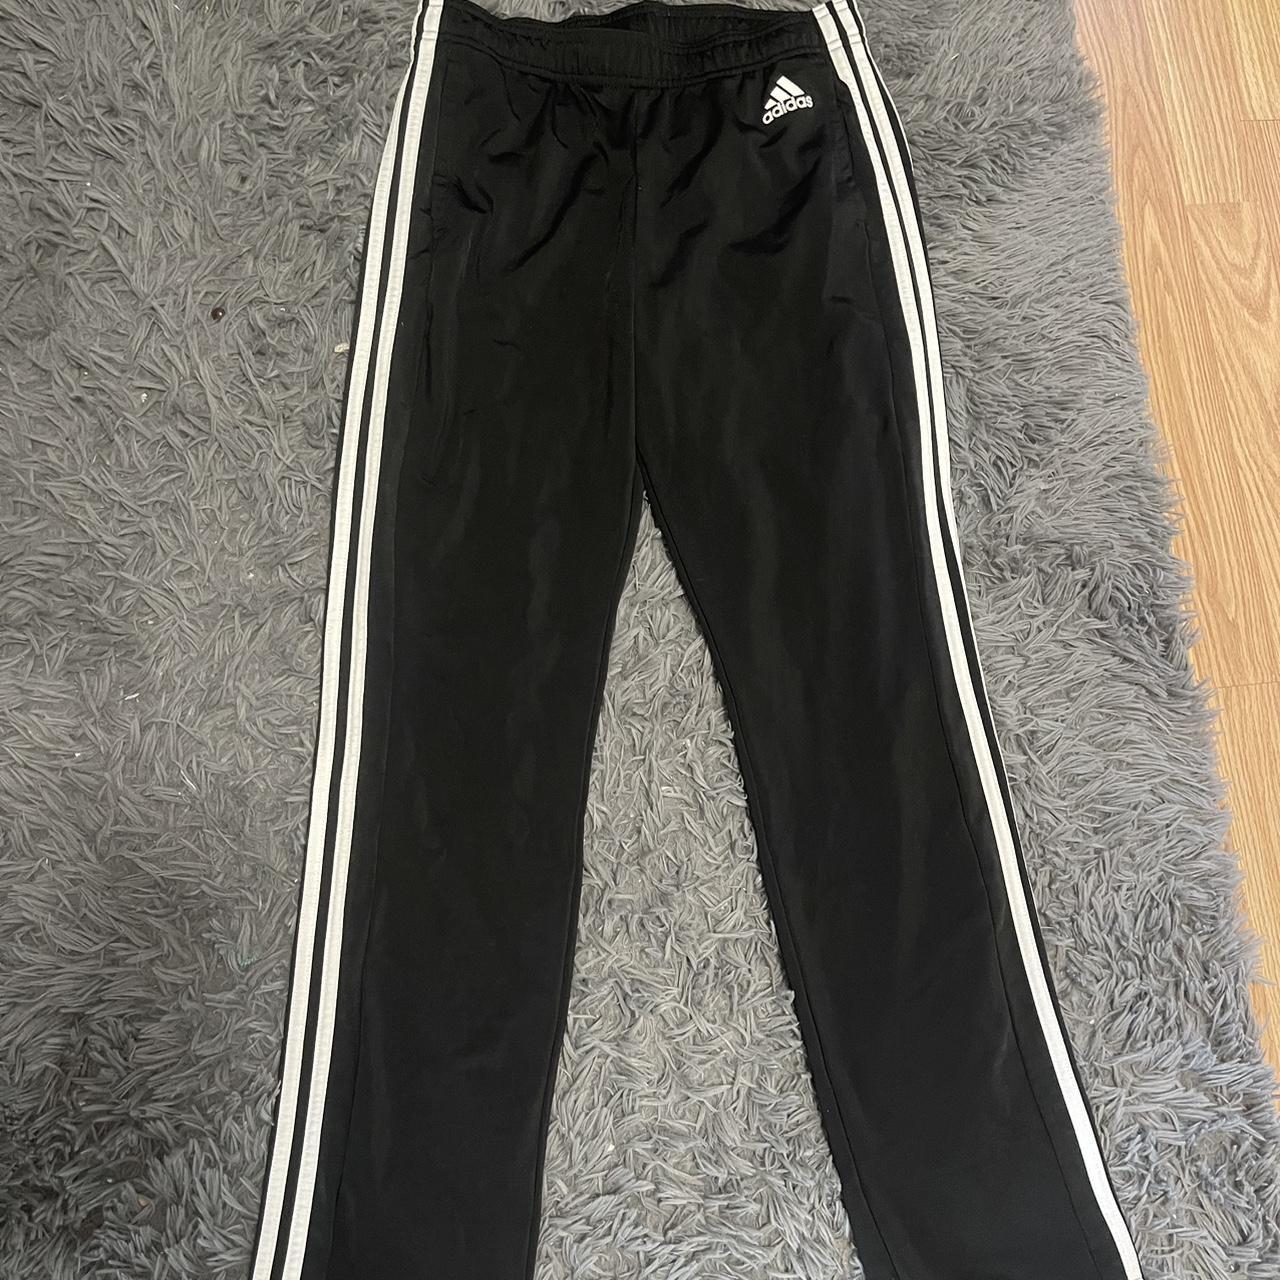 low waisted adidas track pants. women's small - Depop